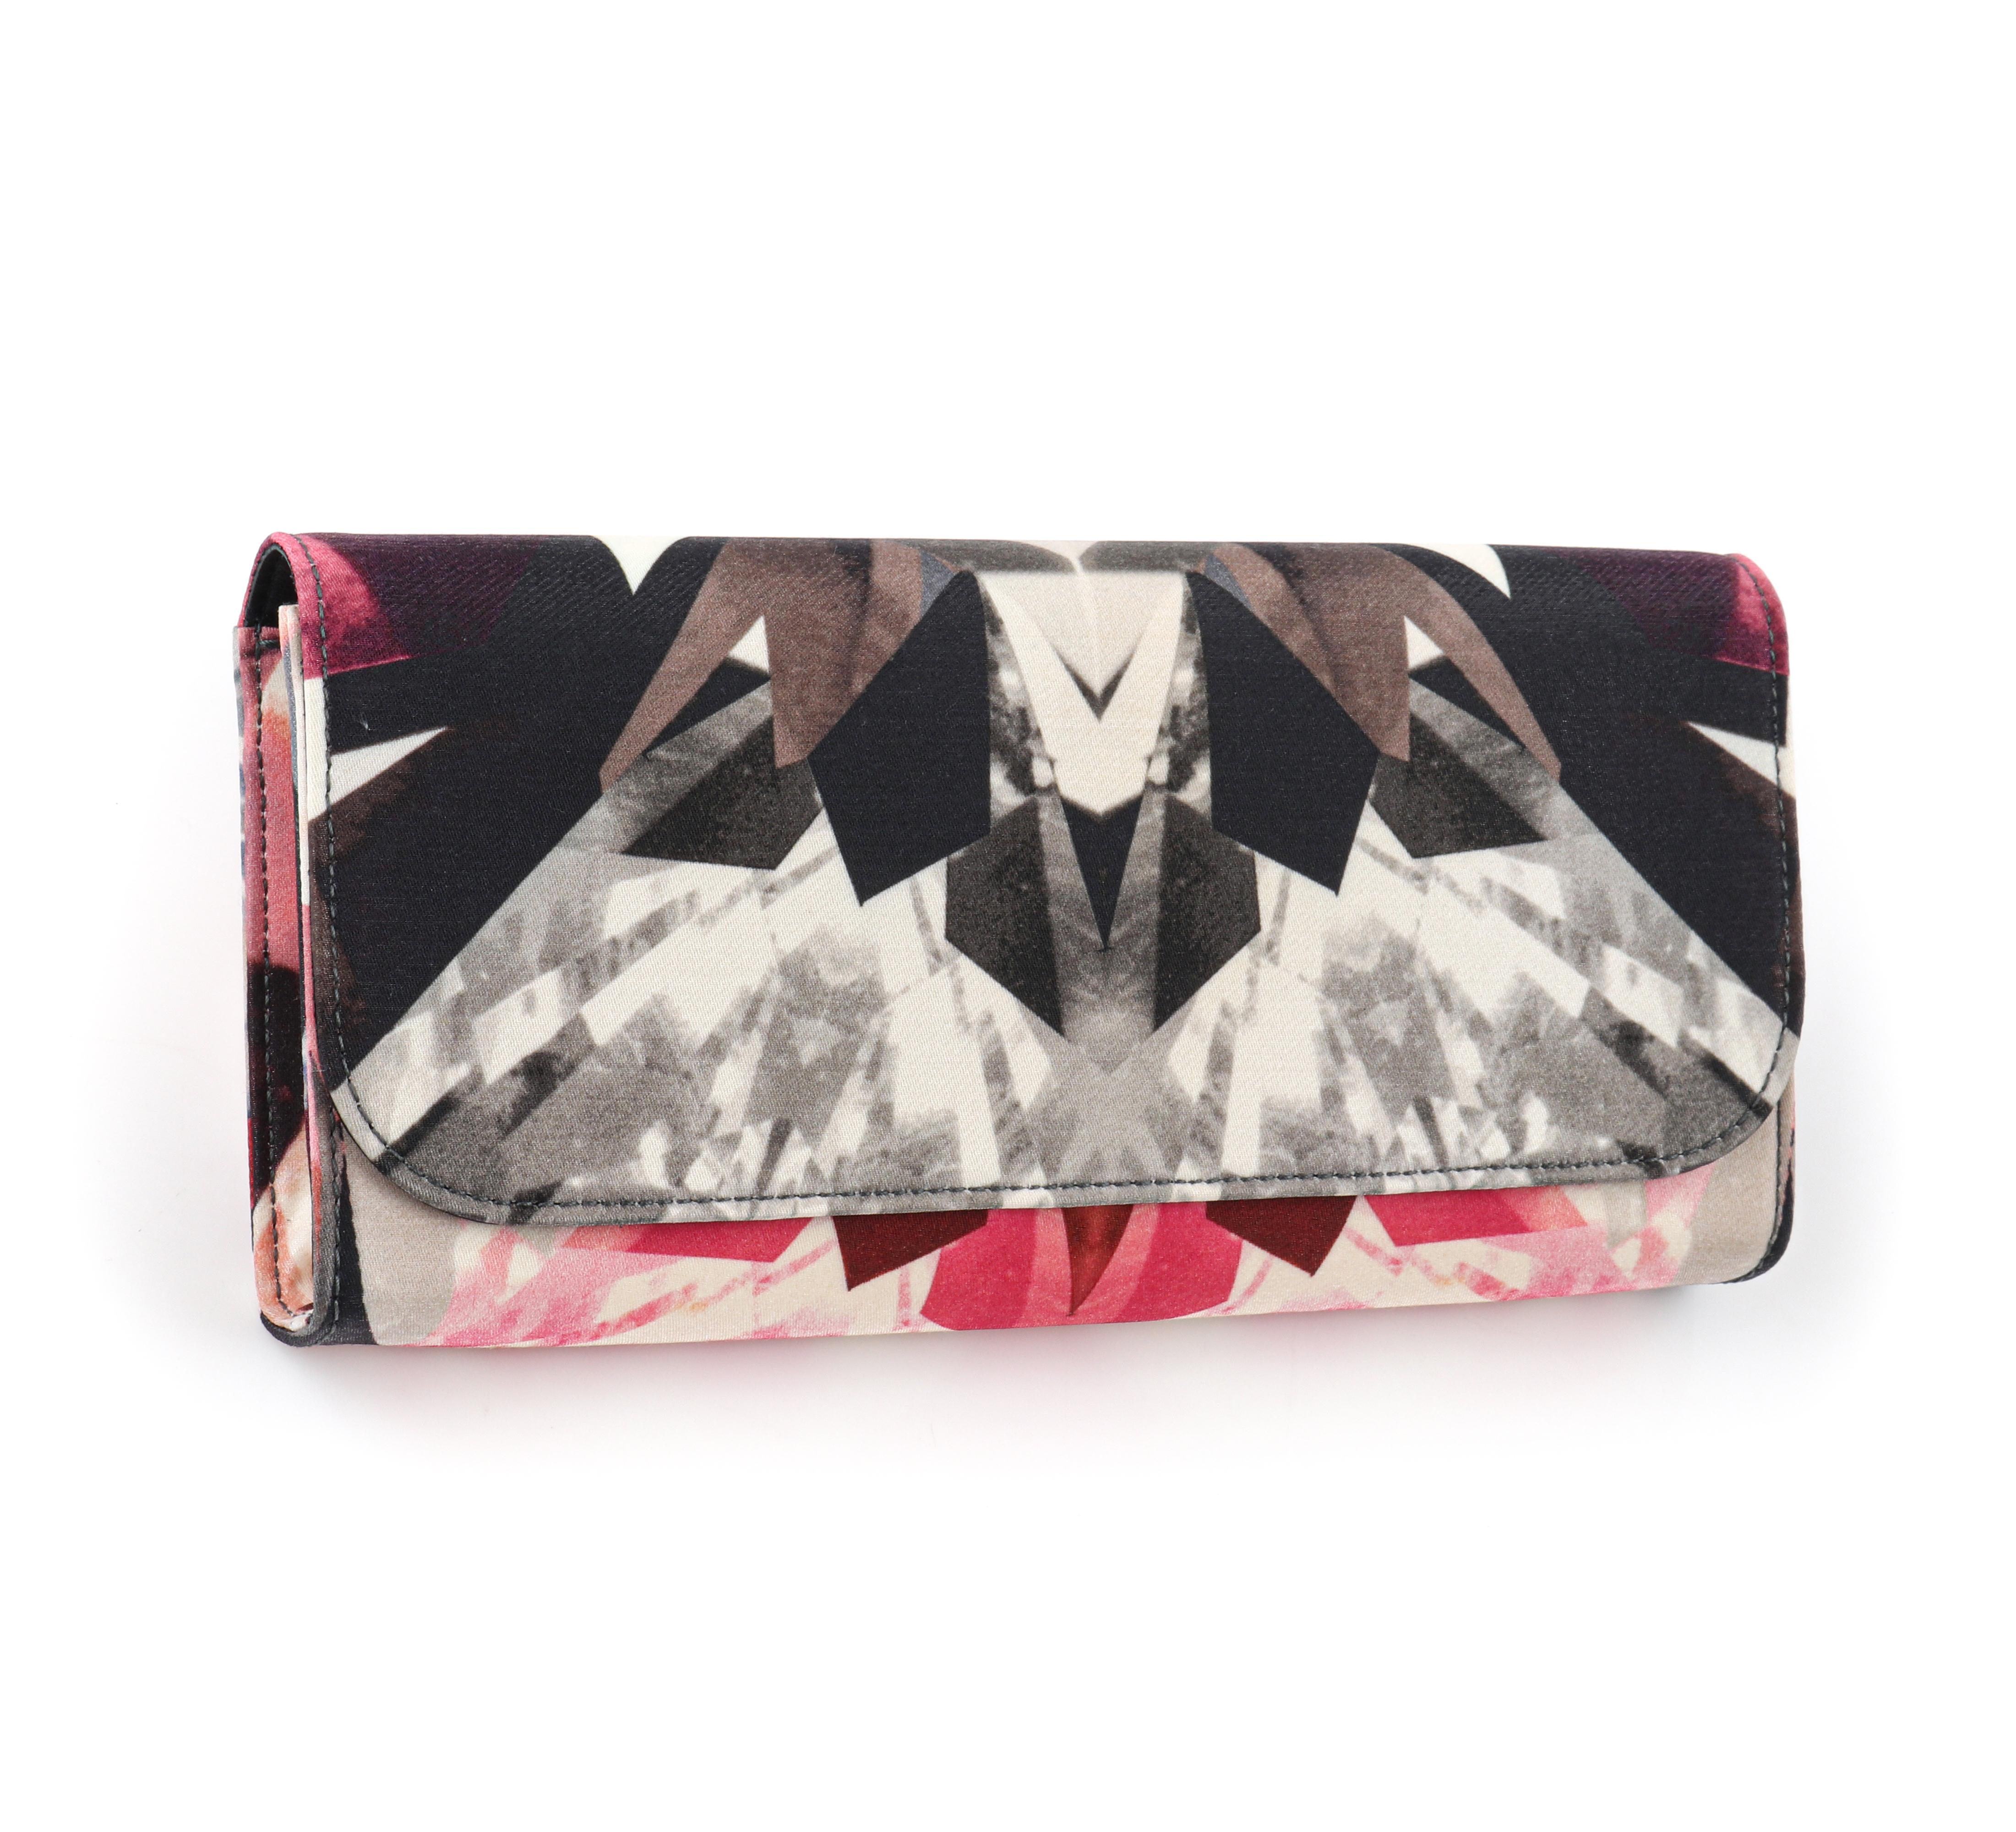 ALEXANDER McQUEEN S/S 2009 Crystal Kaleidoscope Foldover Top Clutch Wallet w/Box
 
Brand/Manufacturer: Alexander McQueen
Collection: S/S 2009 “Natural Dis-tinction” 
Designer: Alexander McQueen
Style: Clutch wallet 
Color(s): Shades of pink, black,